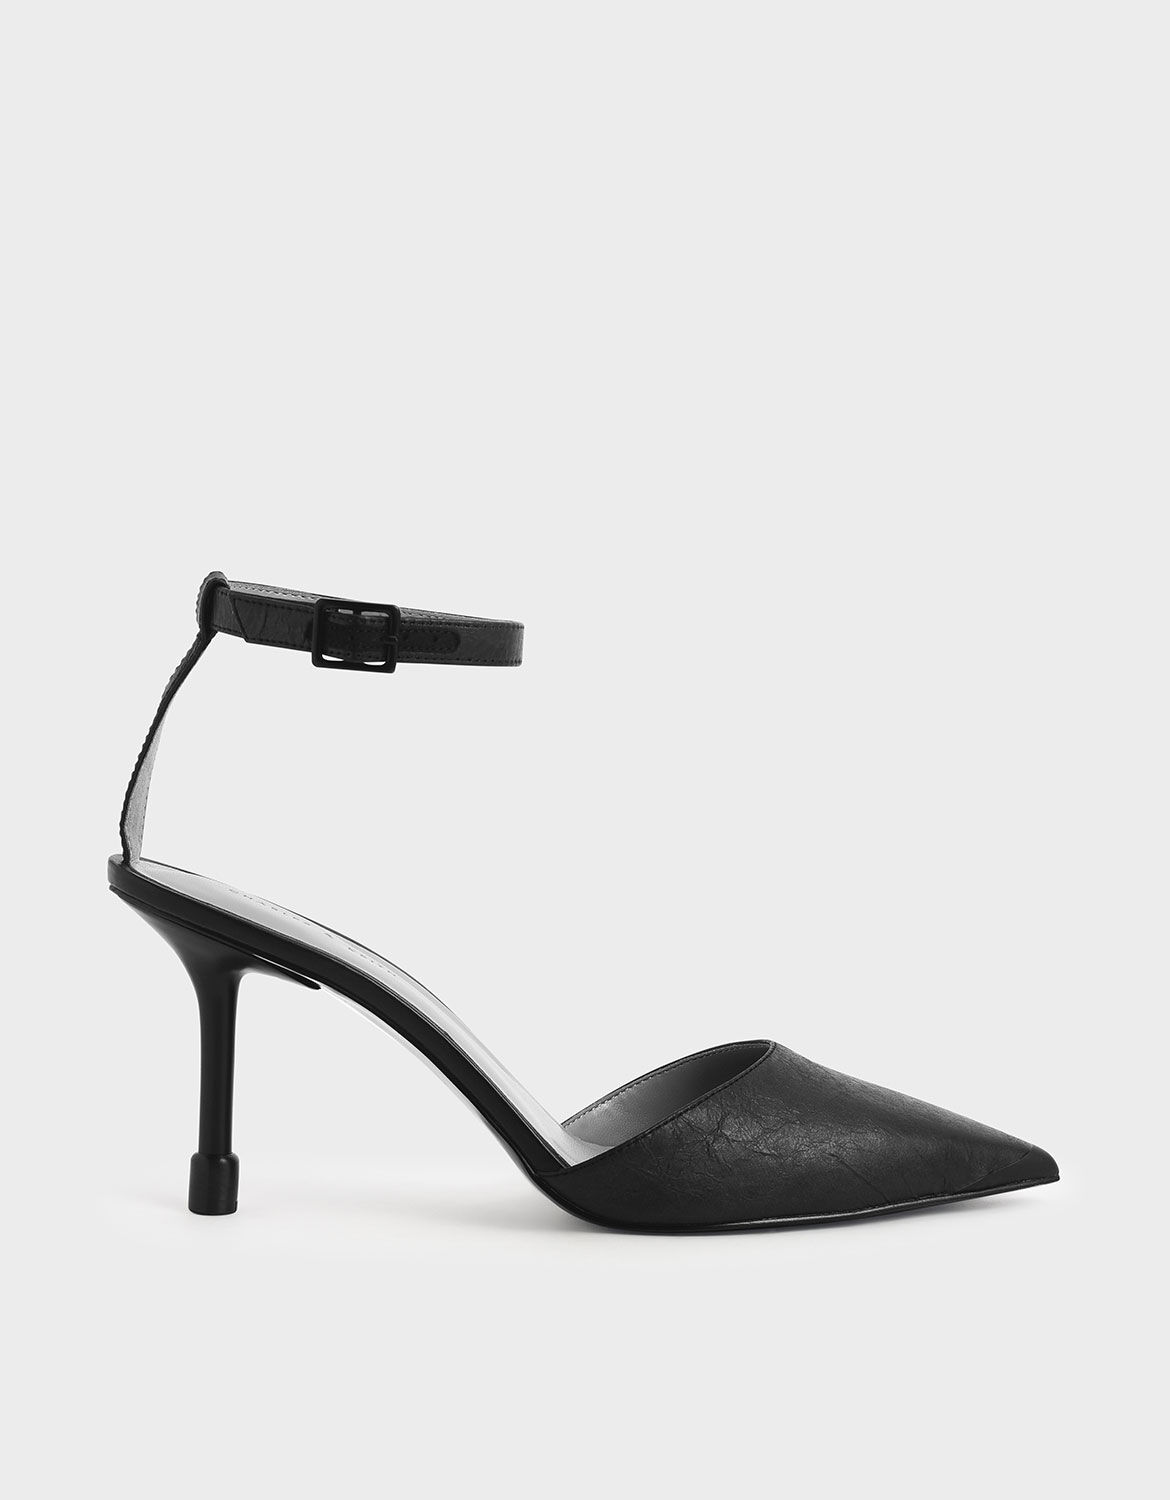 Black Ankle Strap Pointed Toe Pumps 